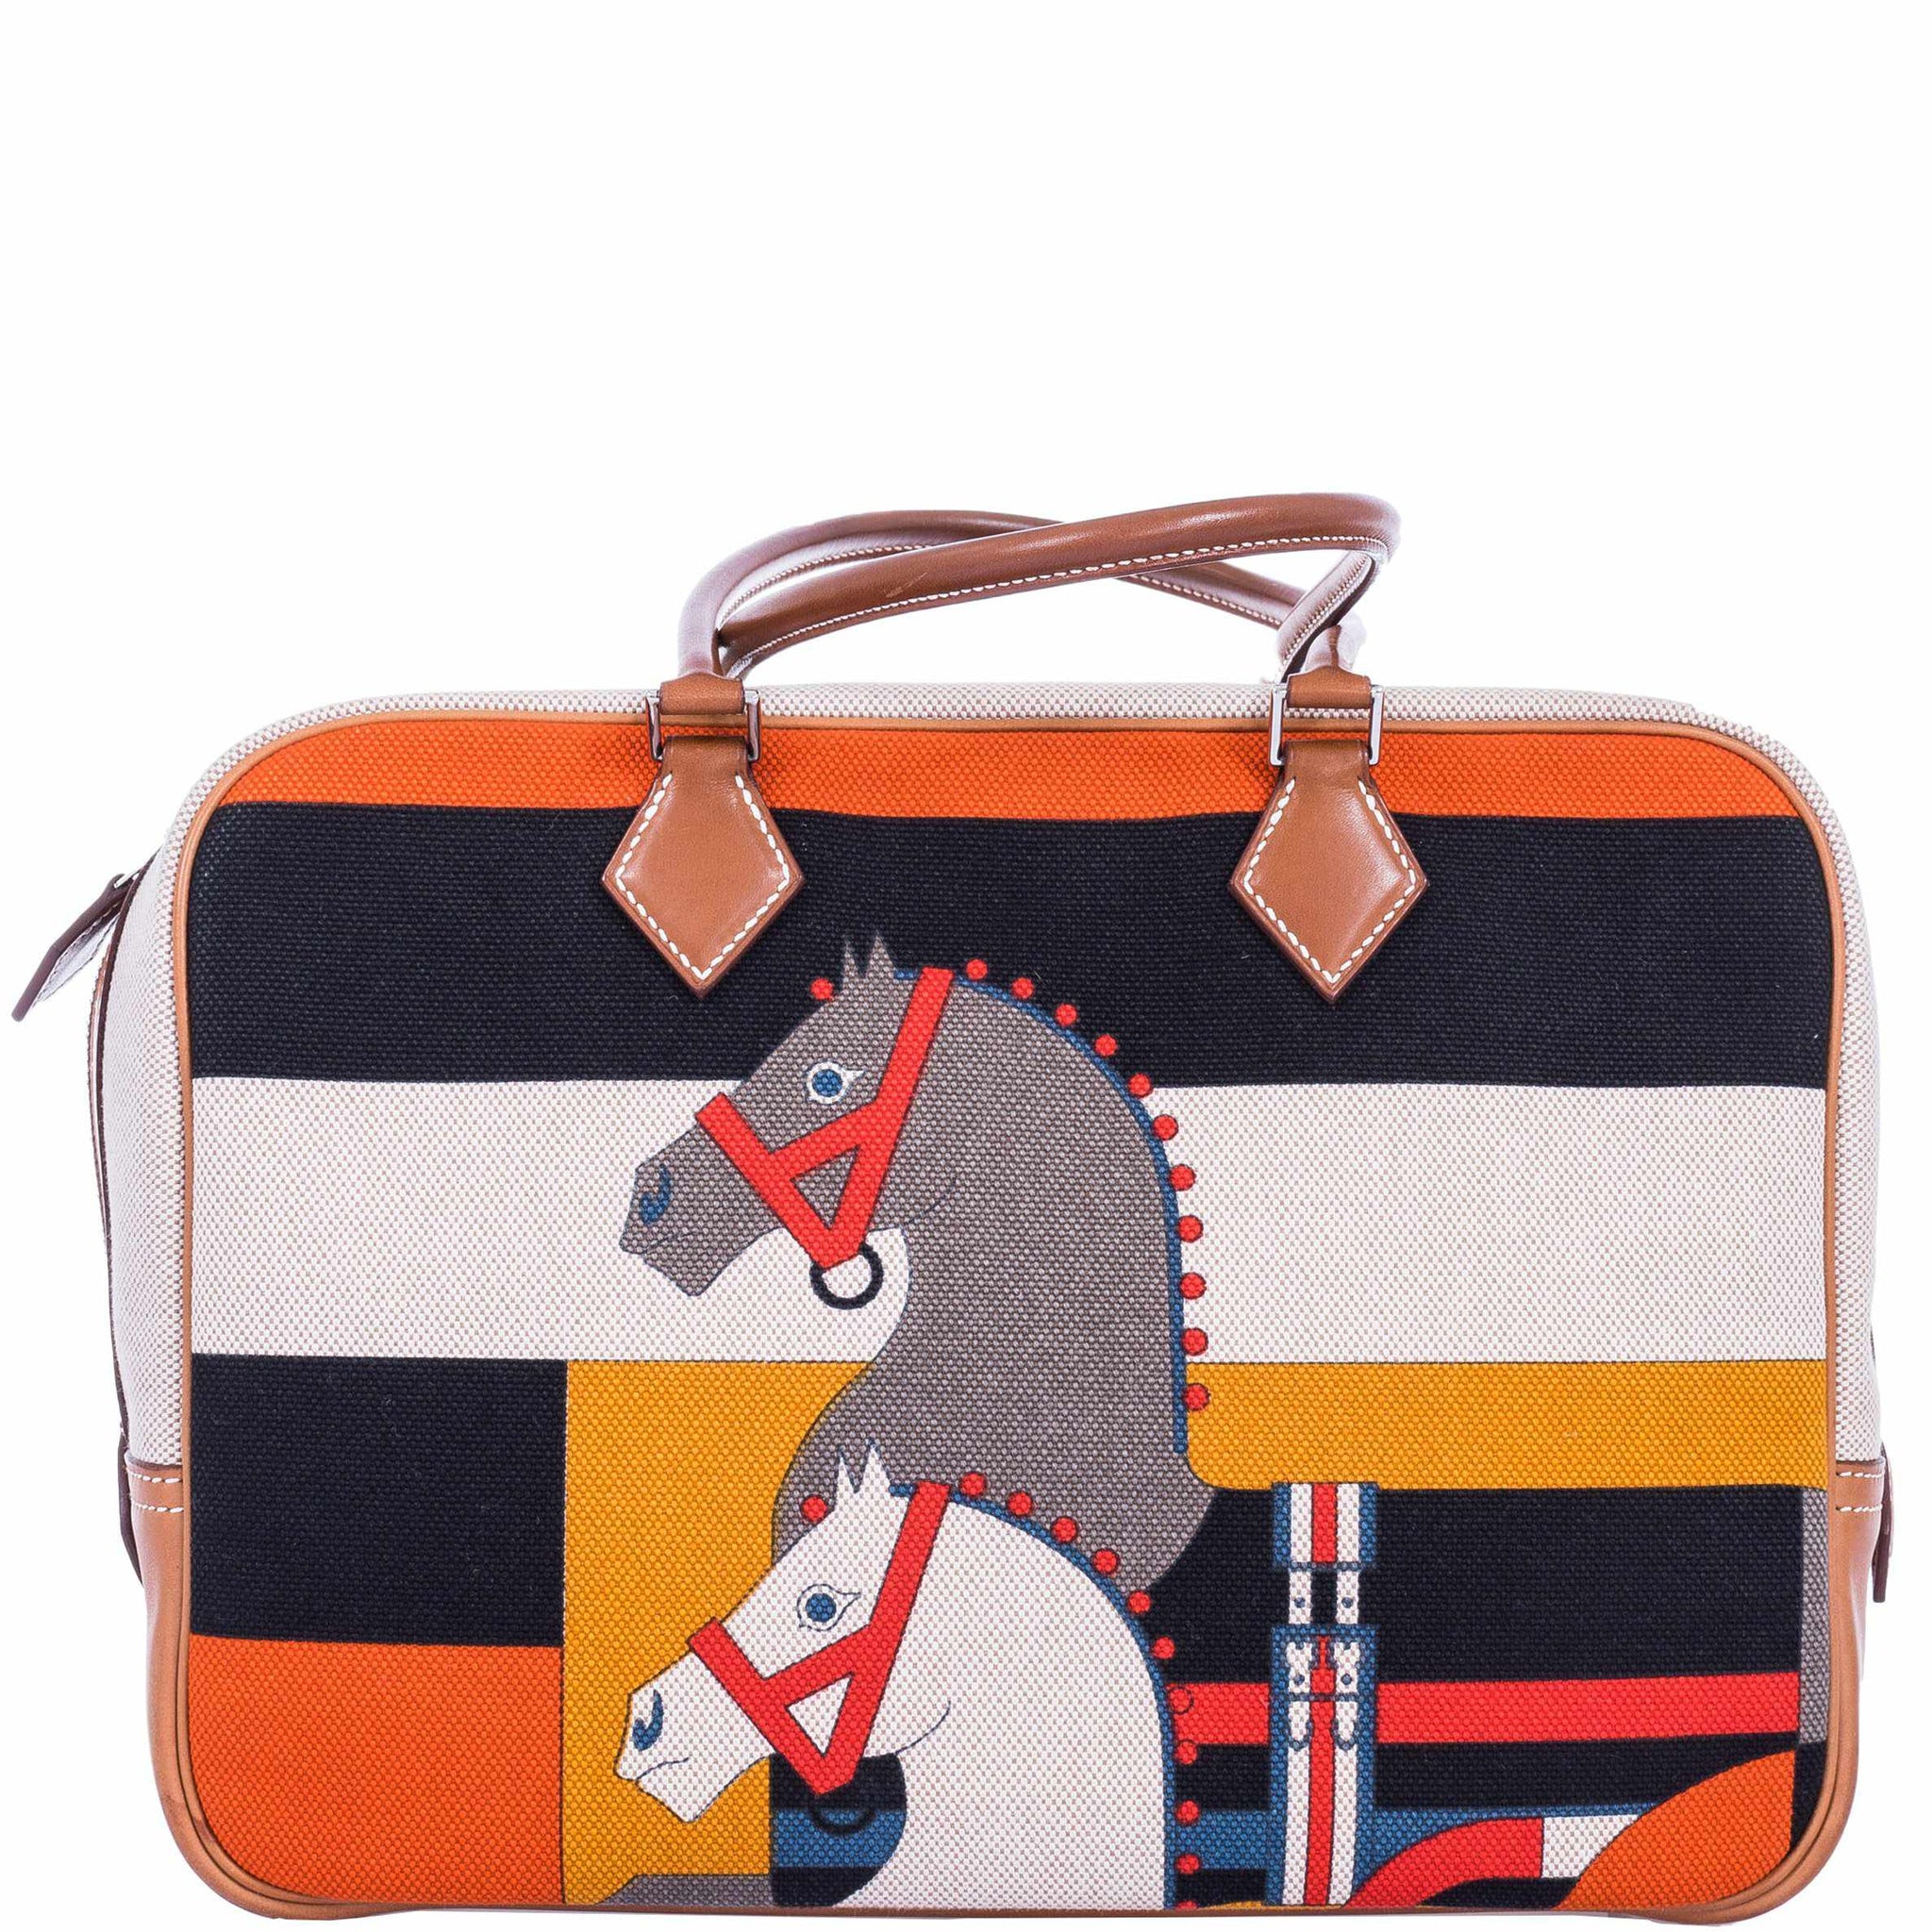 Hermès Barenia And Rocobar Print Toile Plume 32 Palladium Hardware, 2013  Available For Immediate Sale At Sotheby's